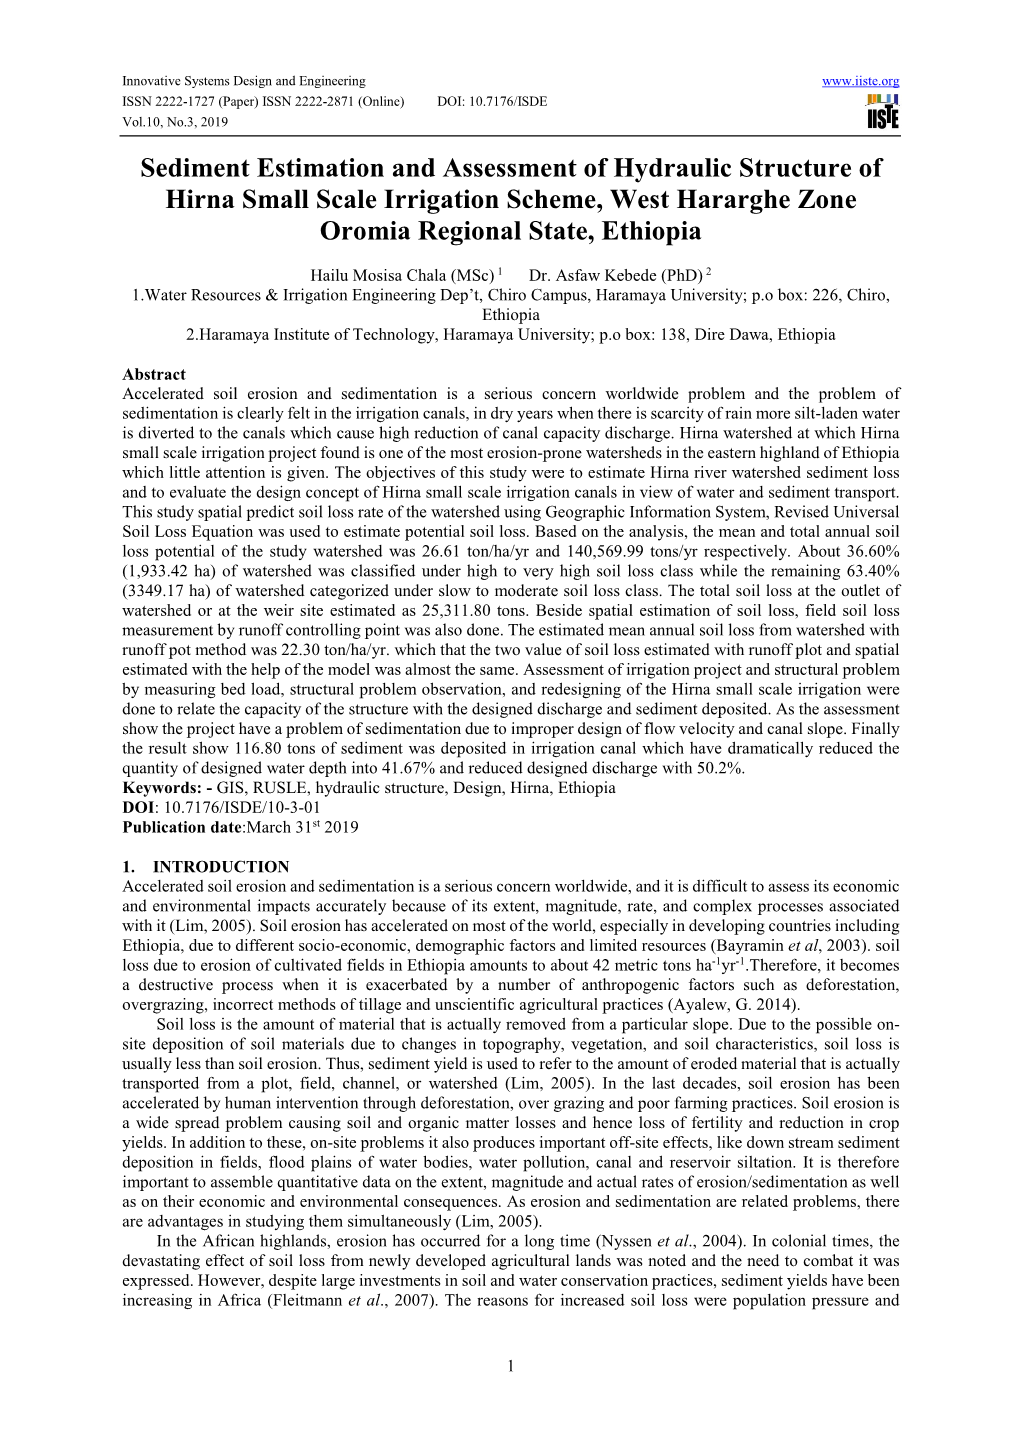 Sediment Estimation and Assessment of Hydraulic Structure of Hirna Small Scale Irrigation Scheme, West Hararghe Zone Oromia Regional State, Ethiopia